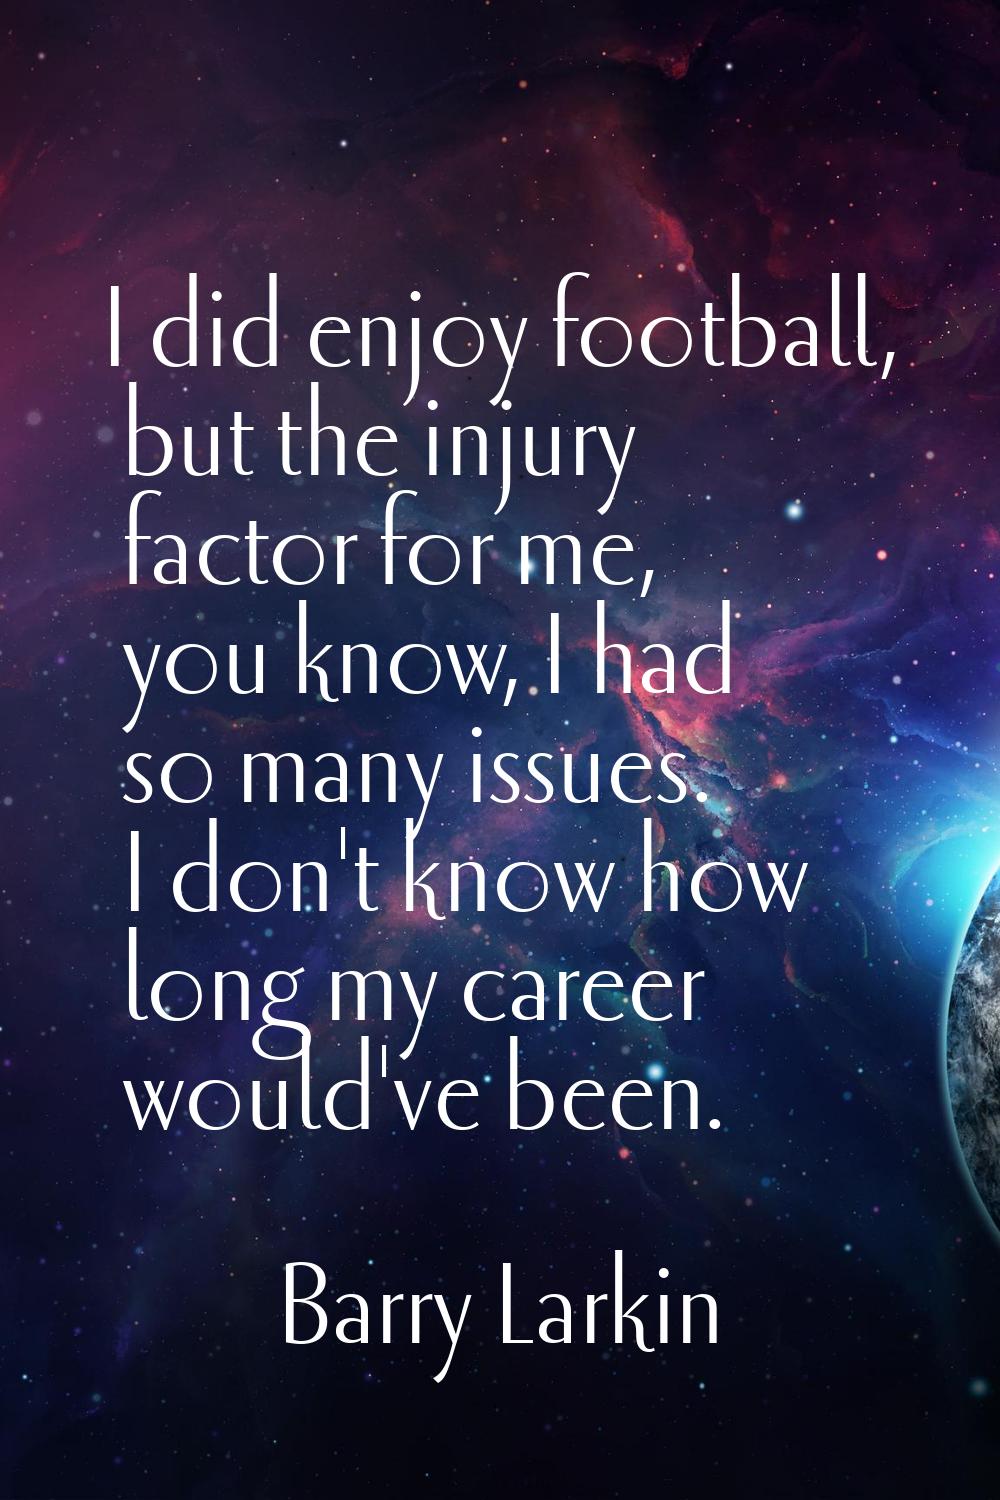 I did enjoy football, but the injury factor for me, you know, I had so many issues. I don't know ho